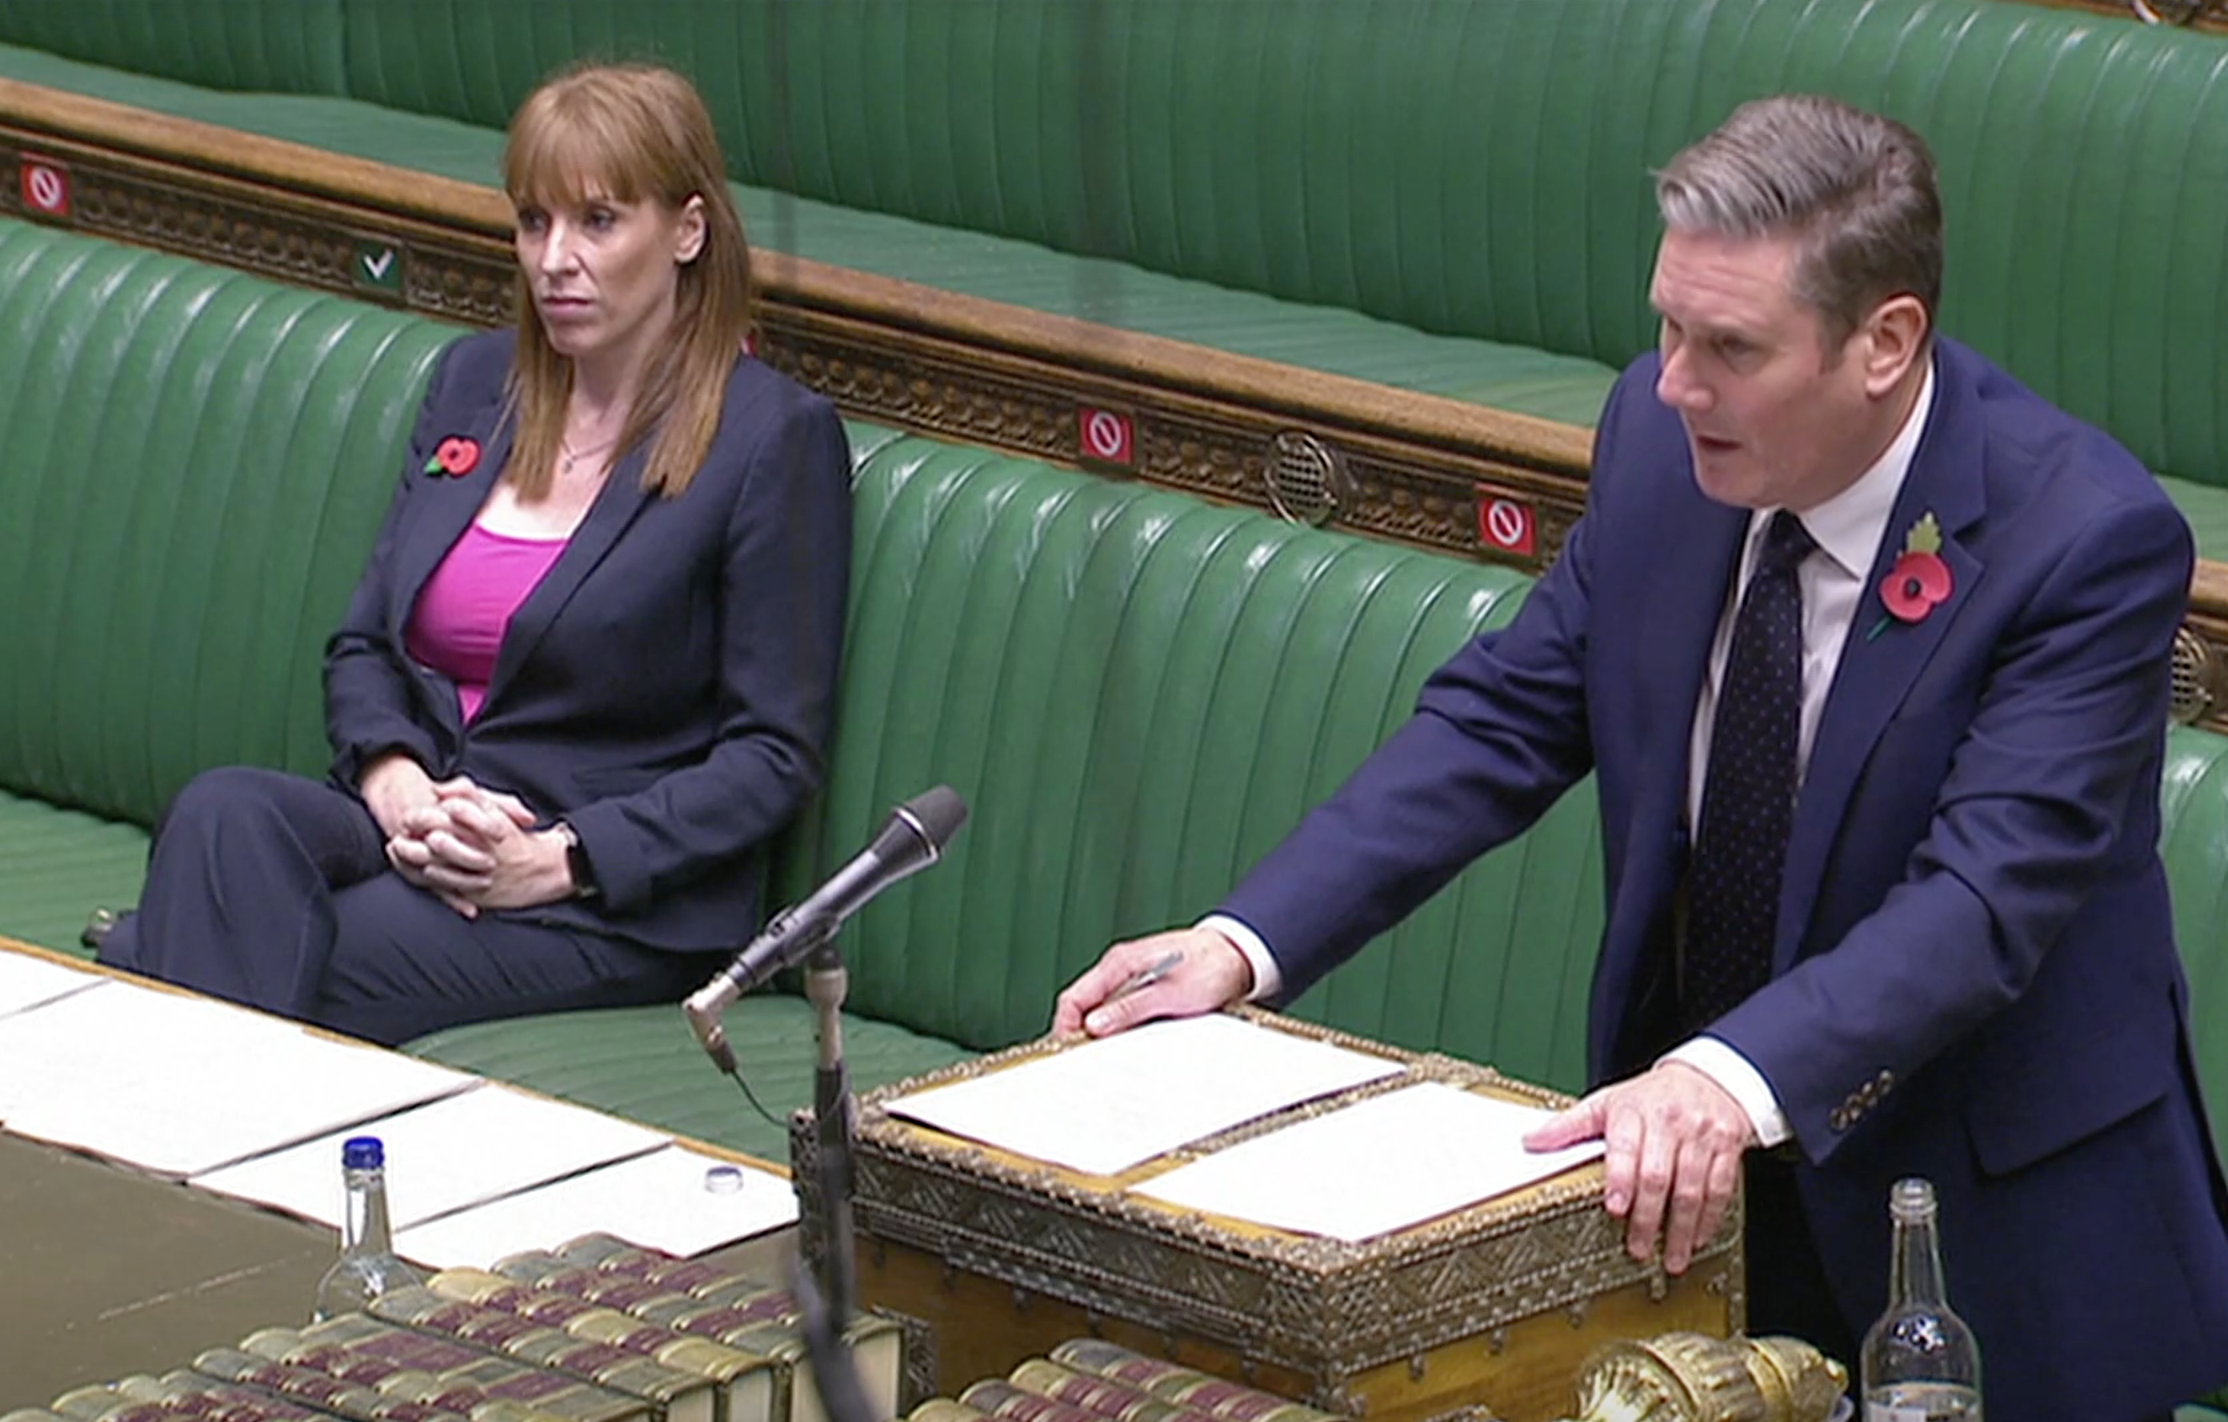 Starmer asks the questions in parliament